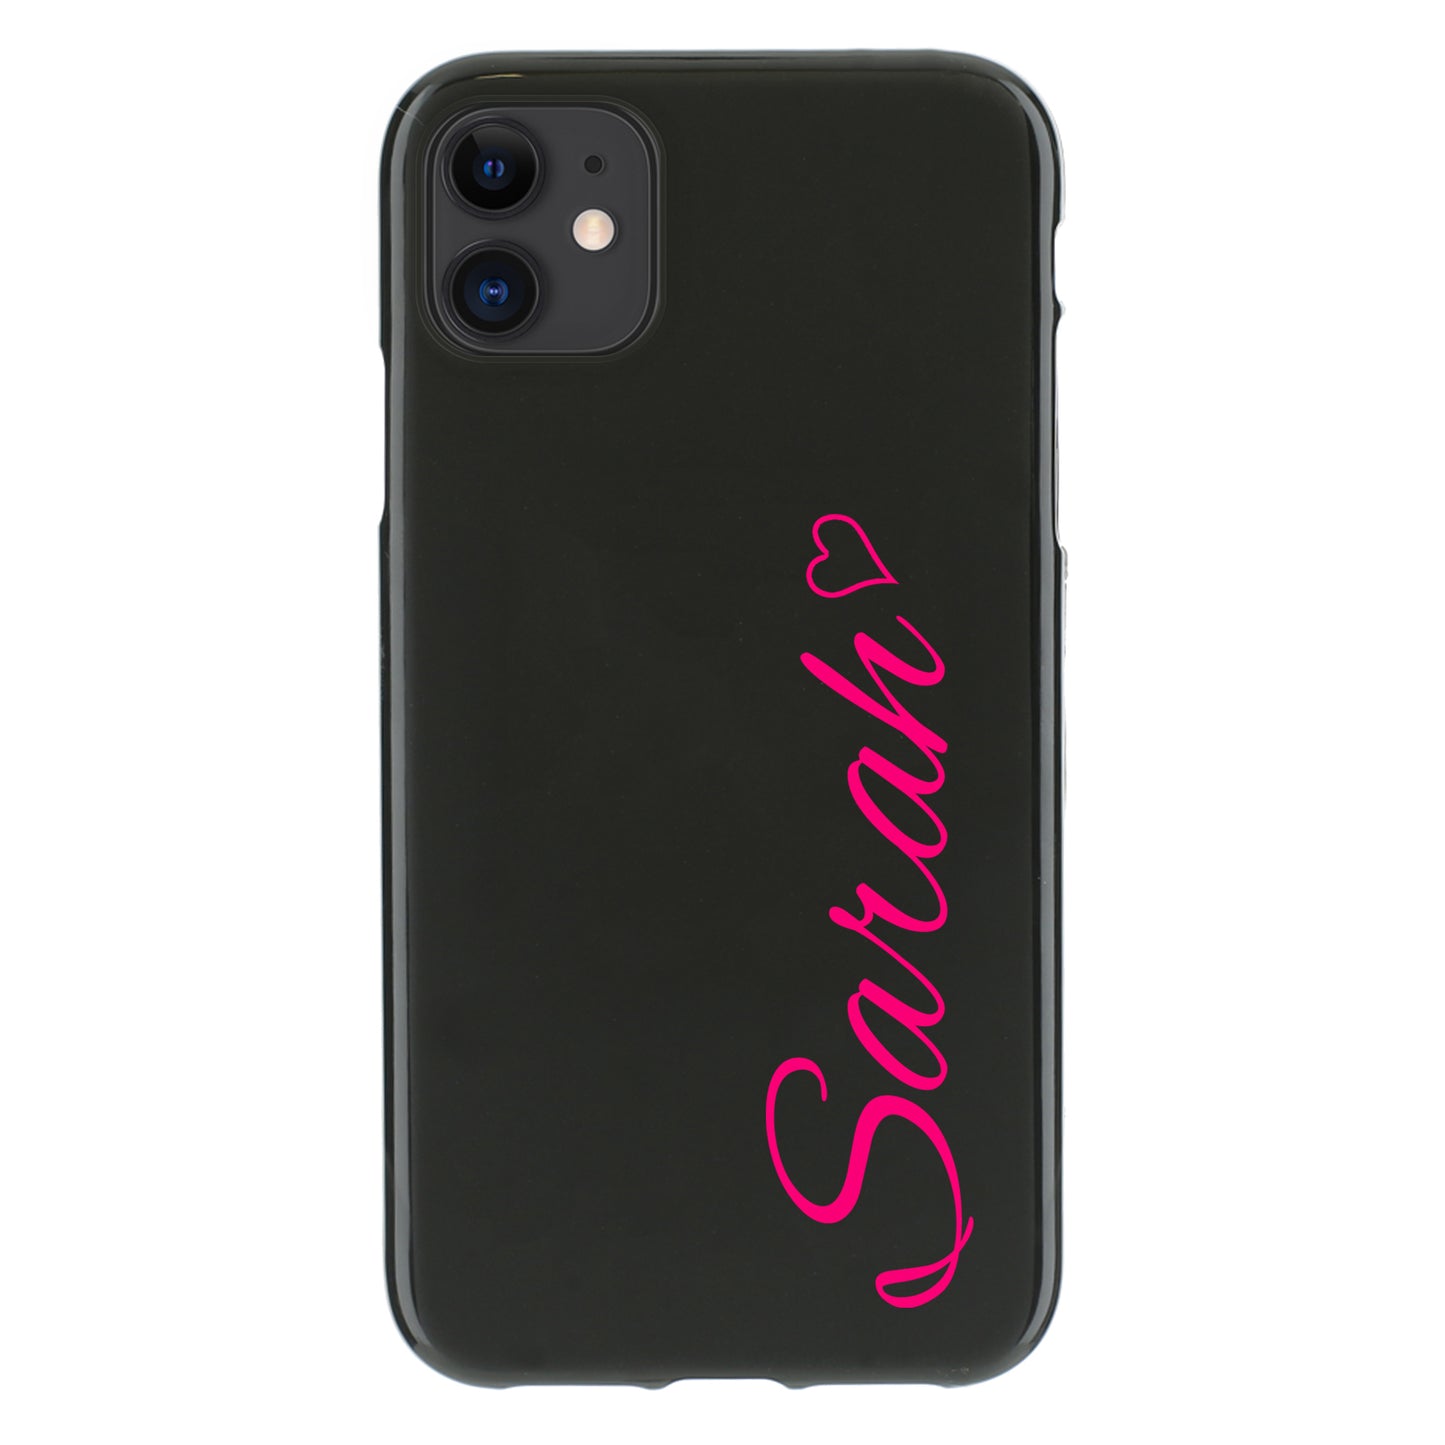 Personalised Oppo Phone Gel Case with Hot Pink Heart Accented Text